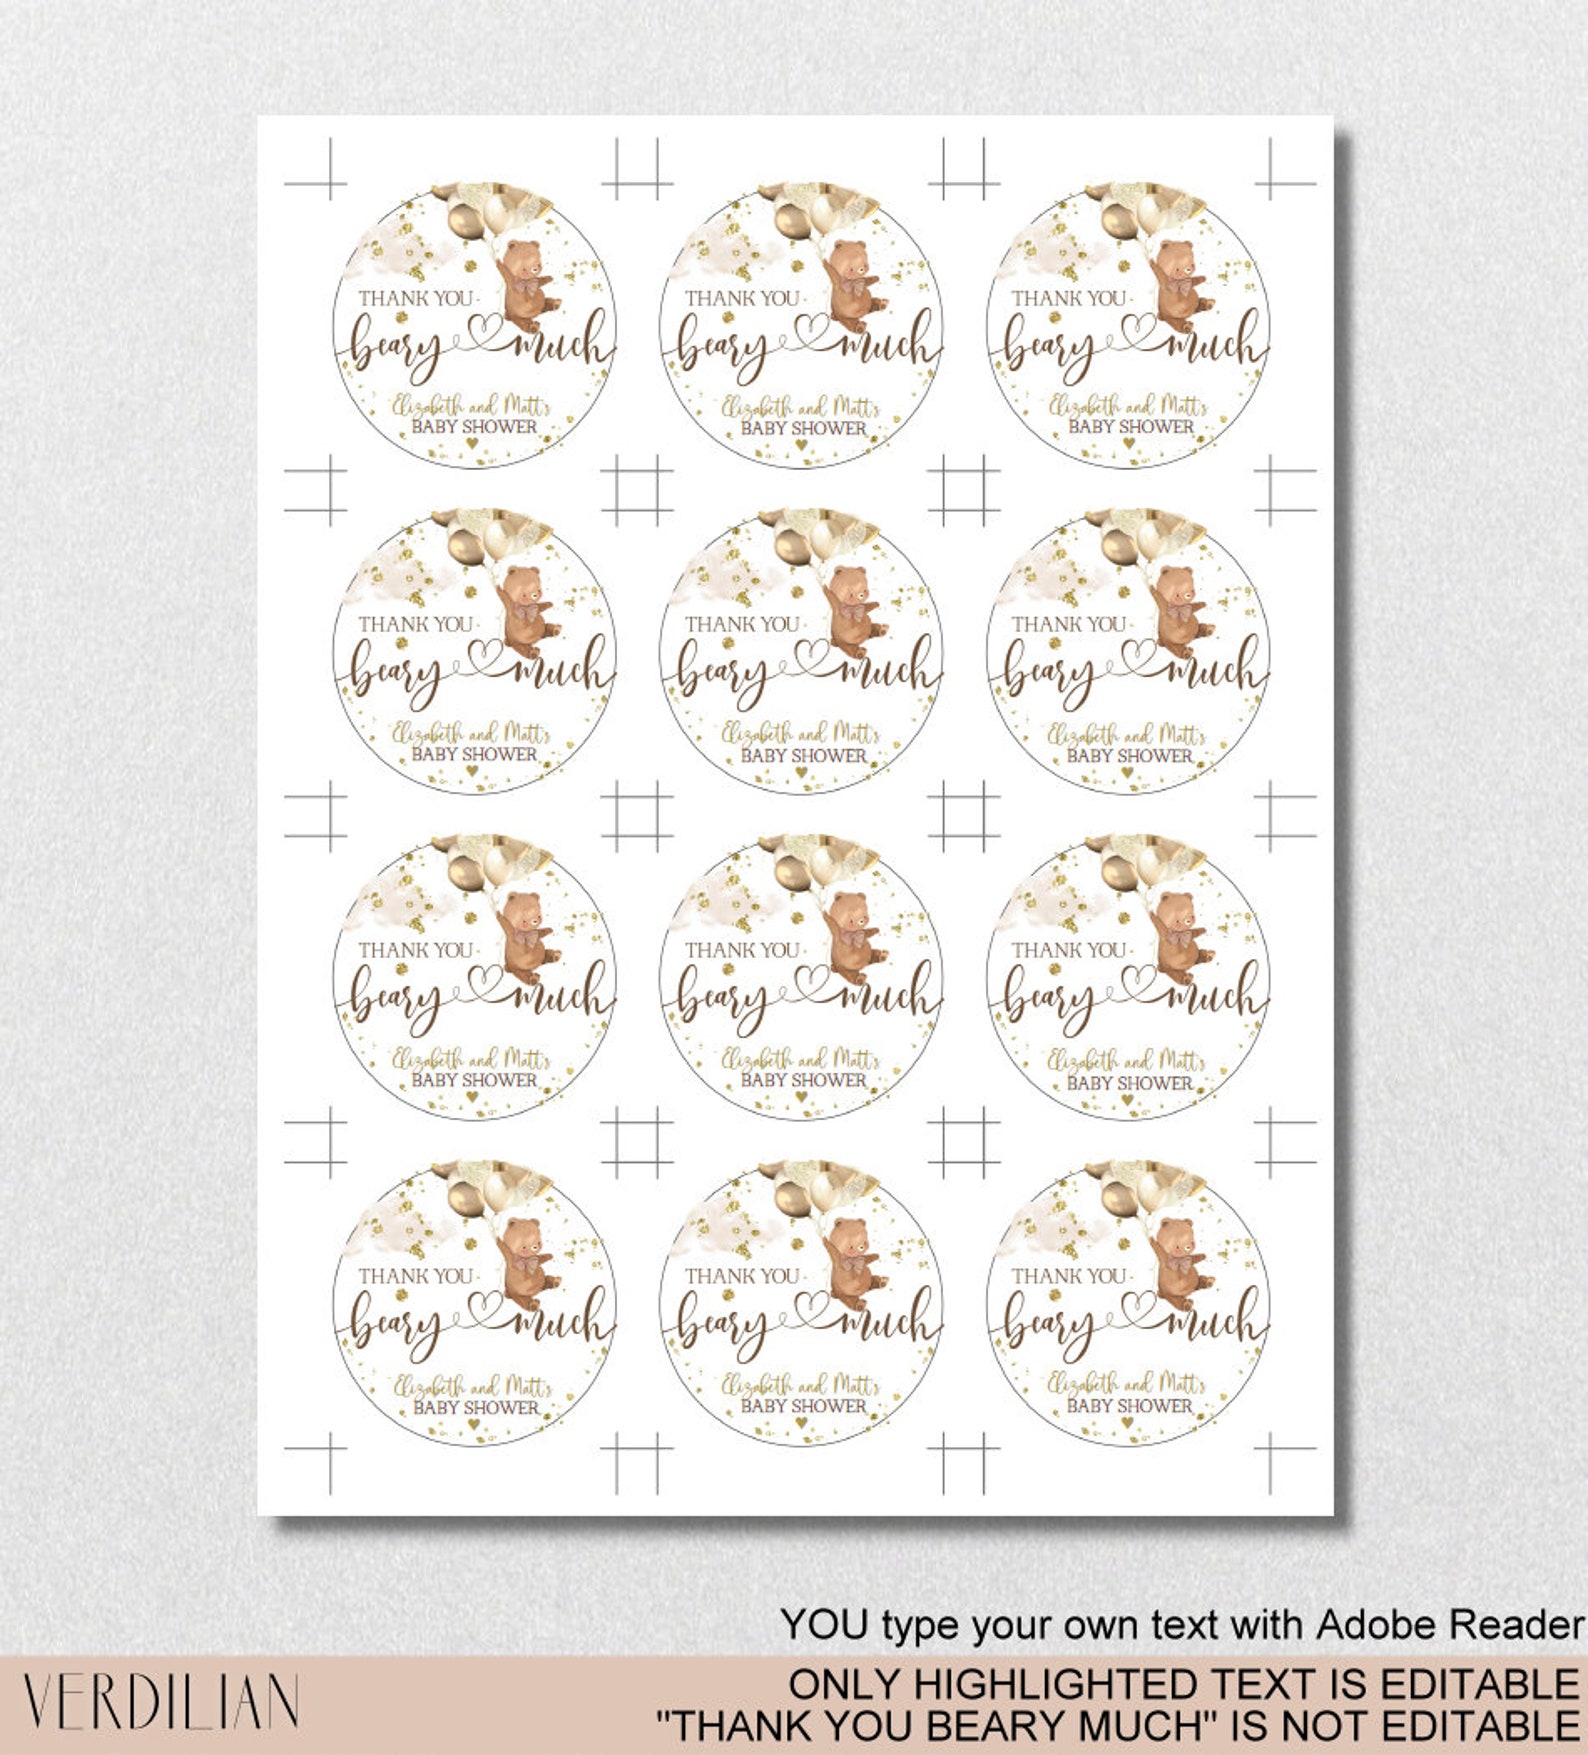 editable-round-favor-tags-pdf-template-2x2-gender-etsy